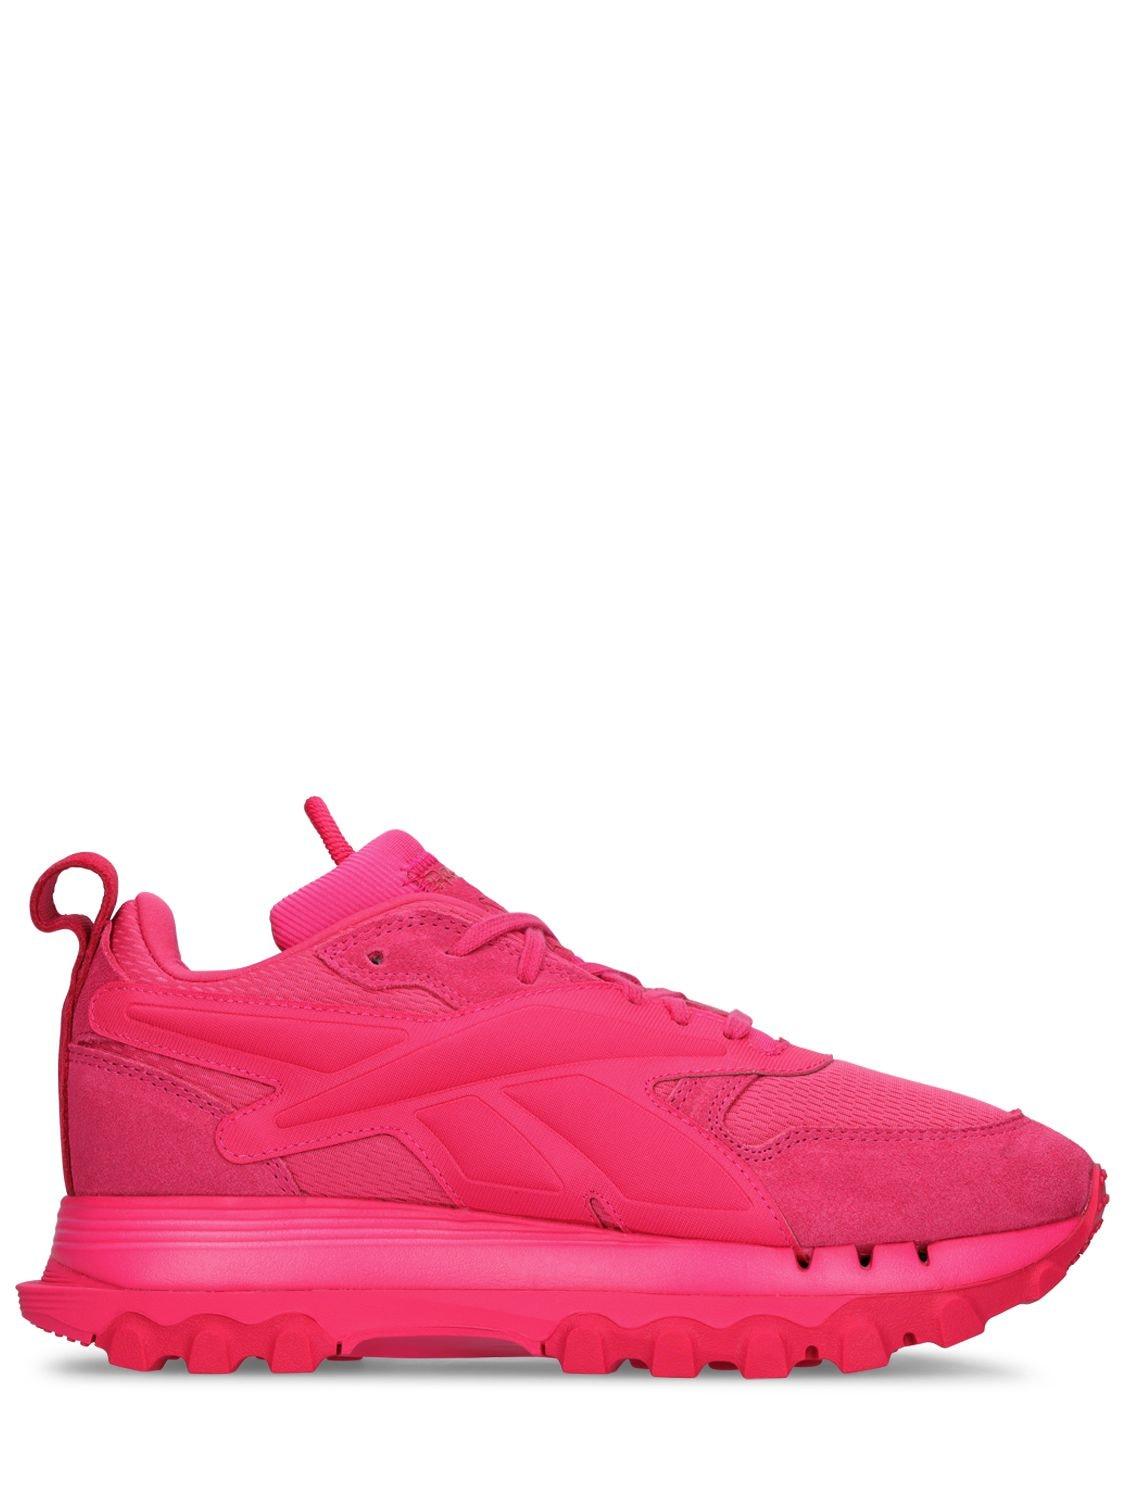 Reebok Cardi B V2 Classic Leather Sneakers in Pink | Lyst